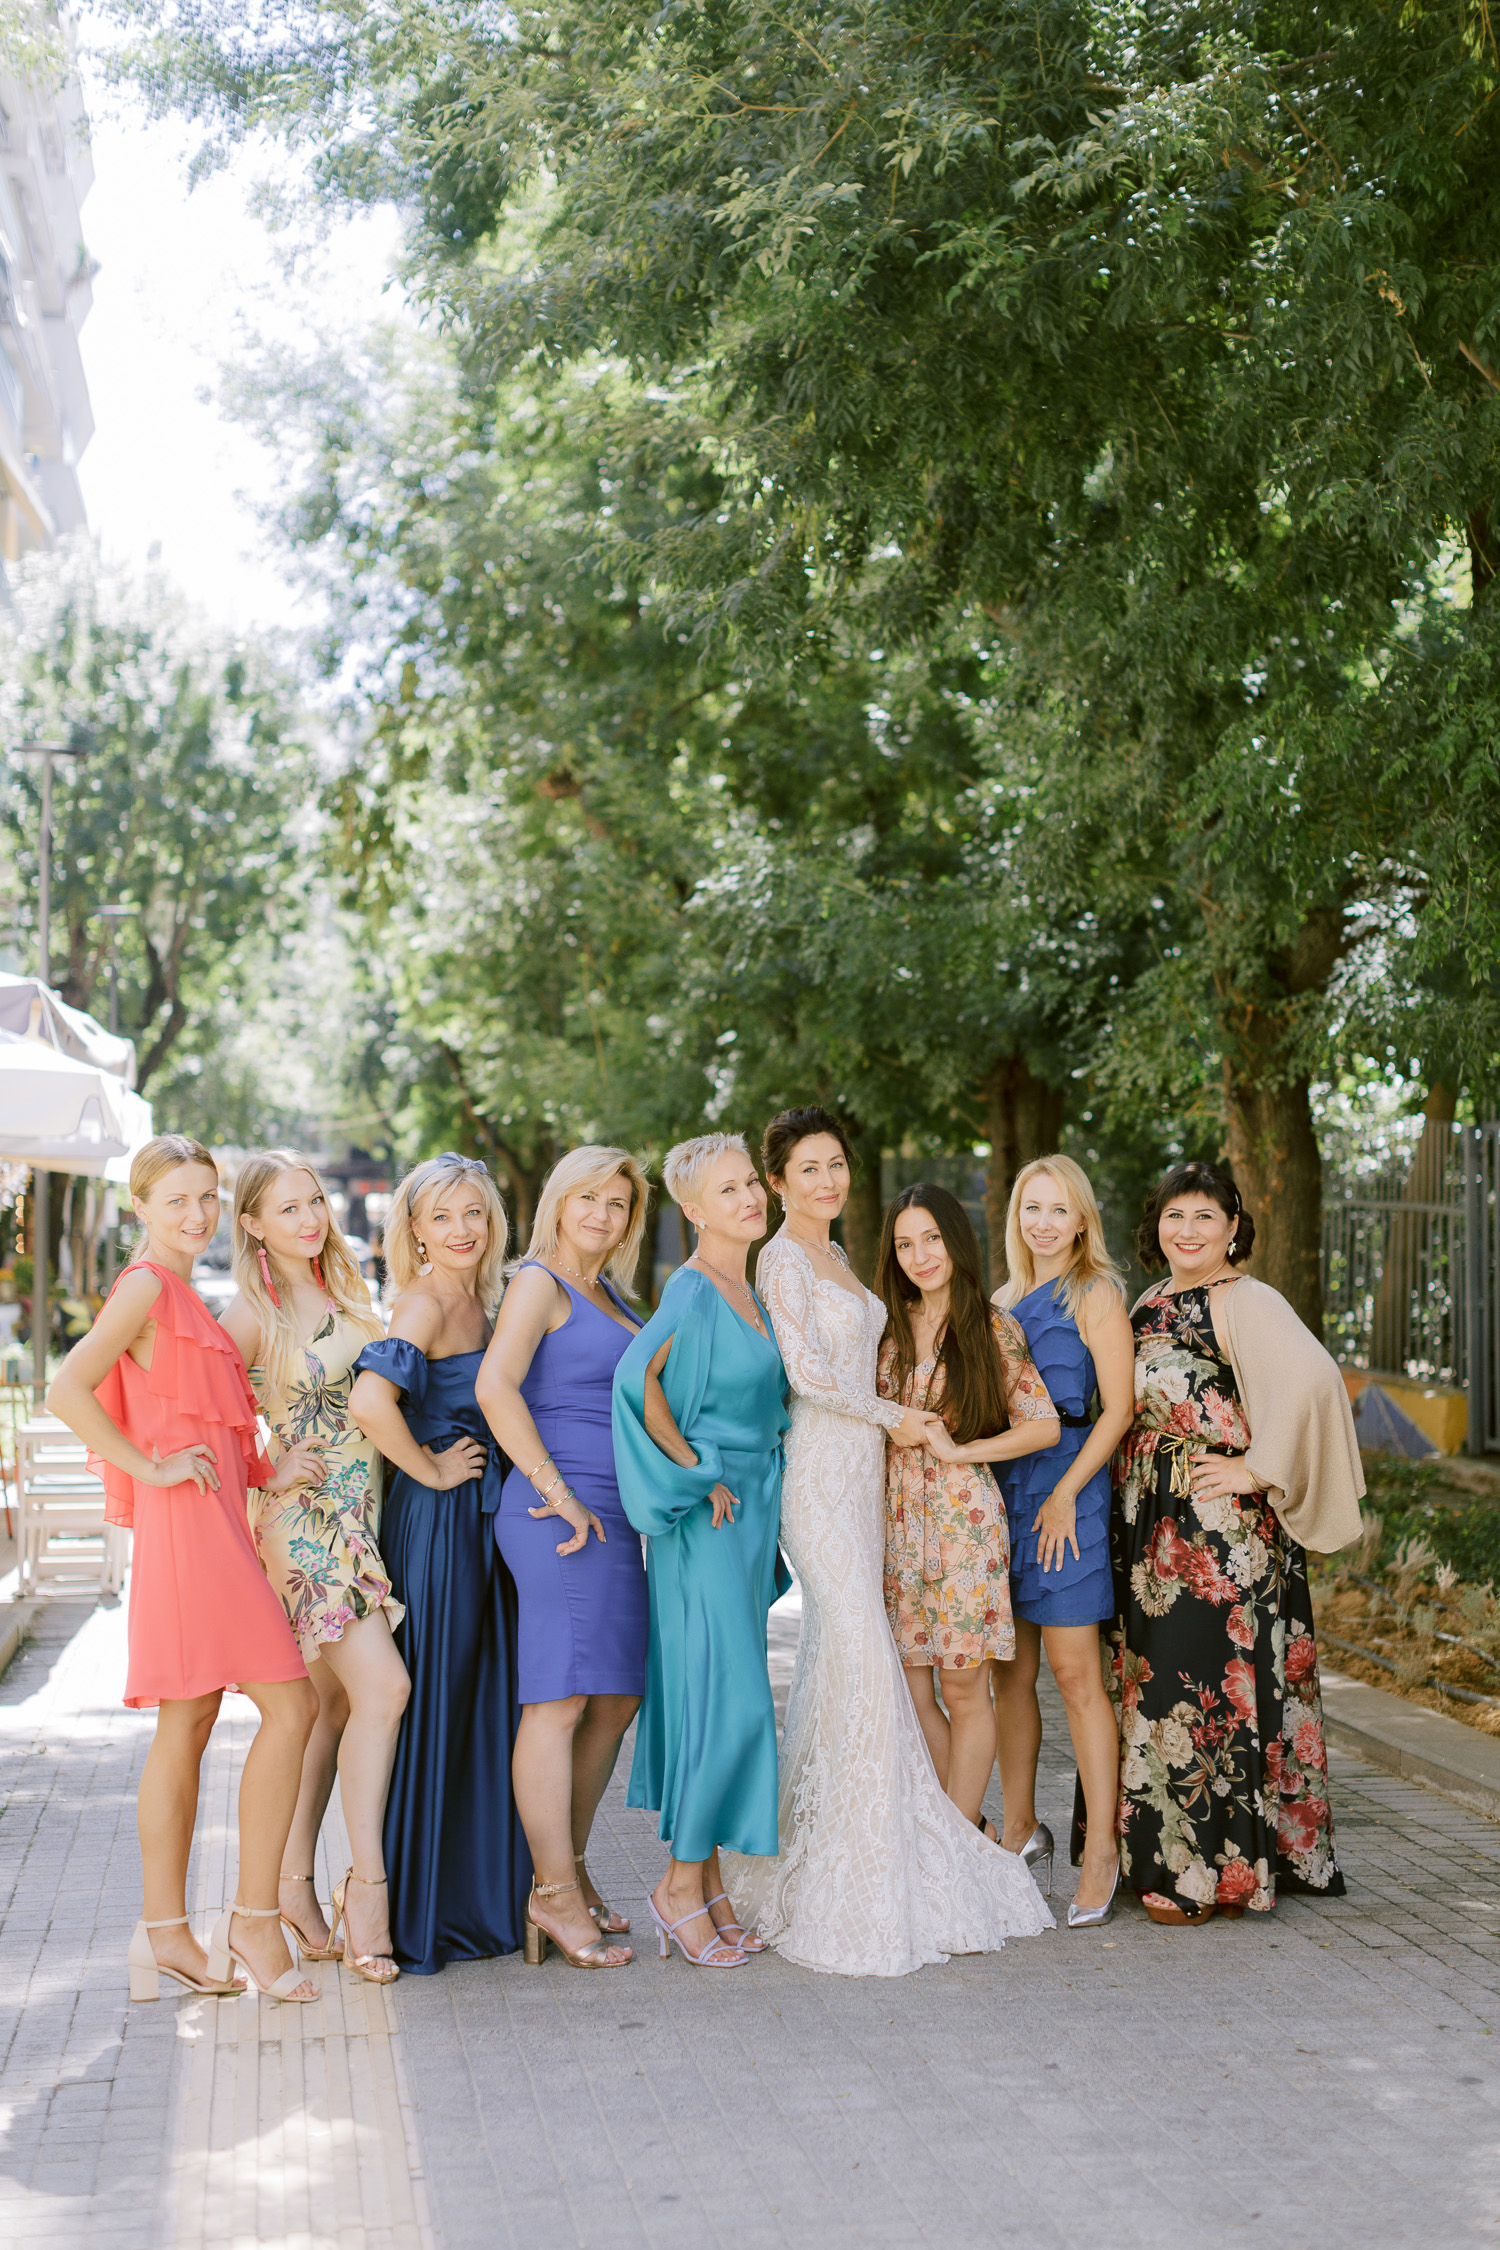 This wonderful bridal party having some photos before they leave for the ceremony